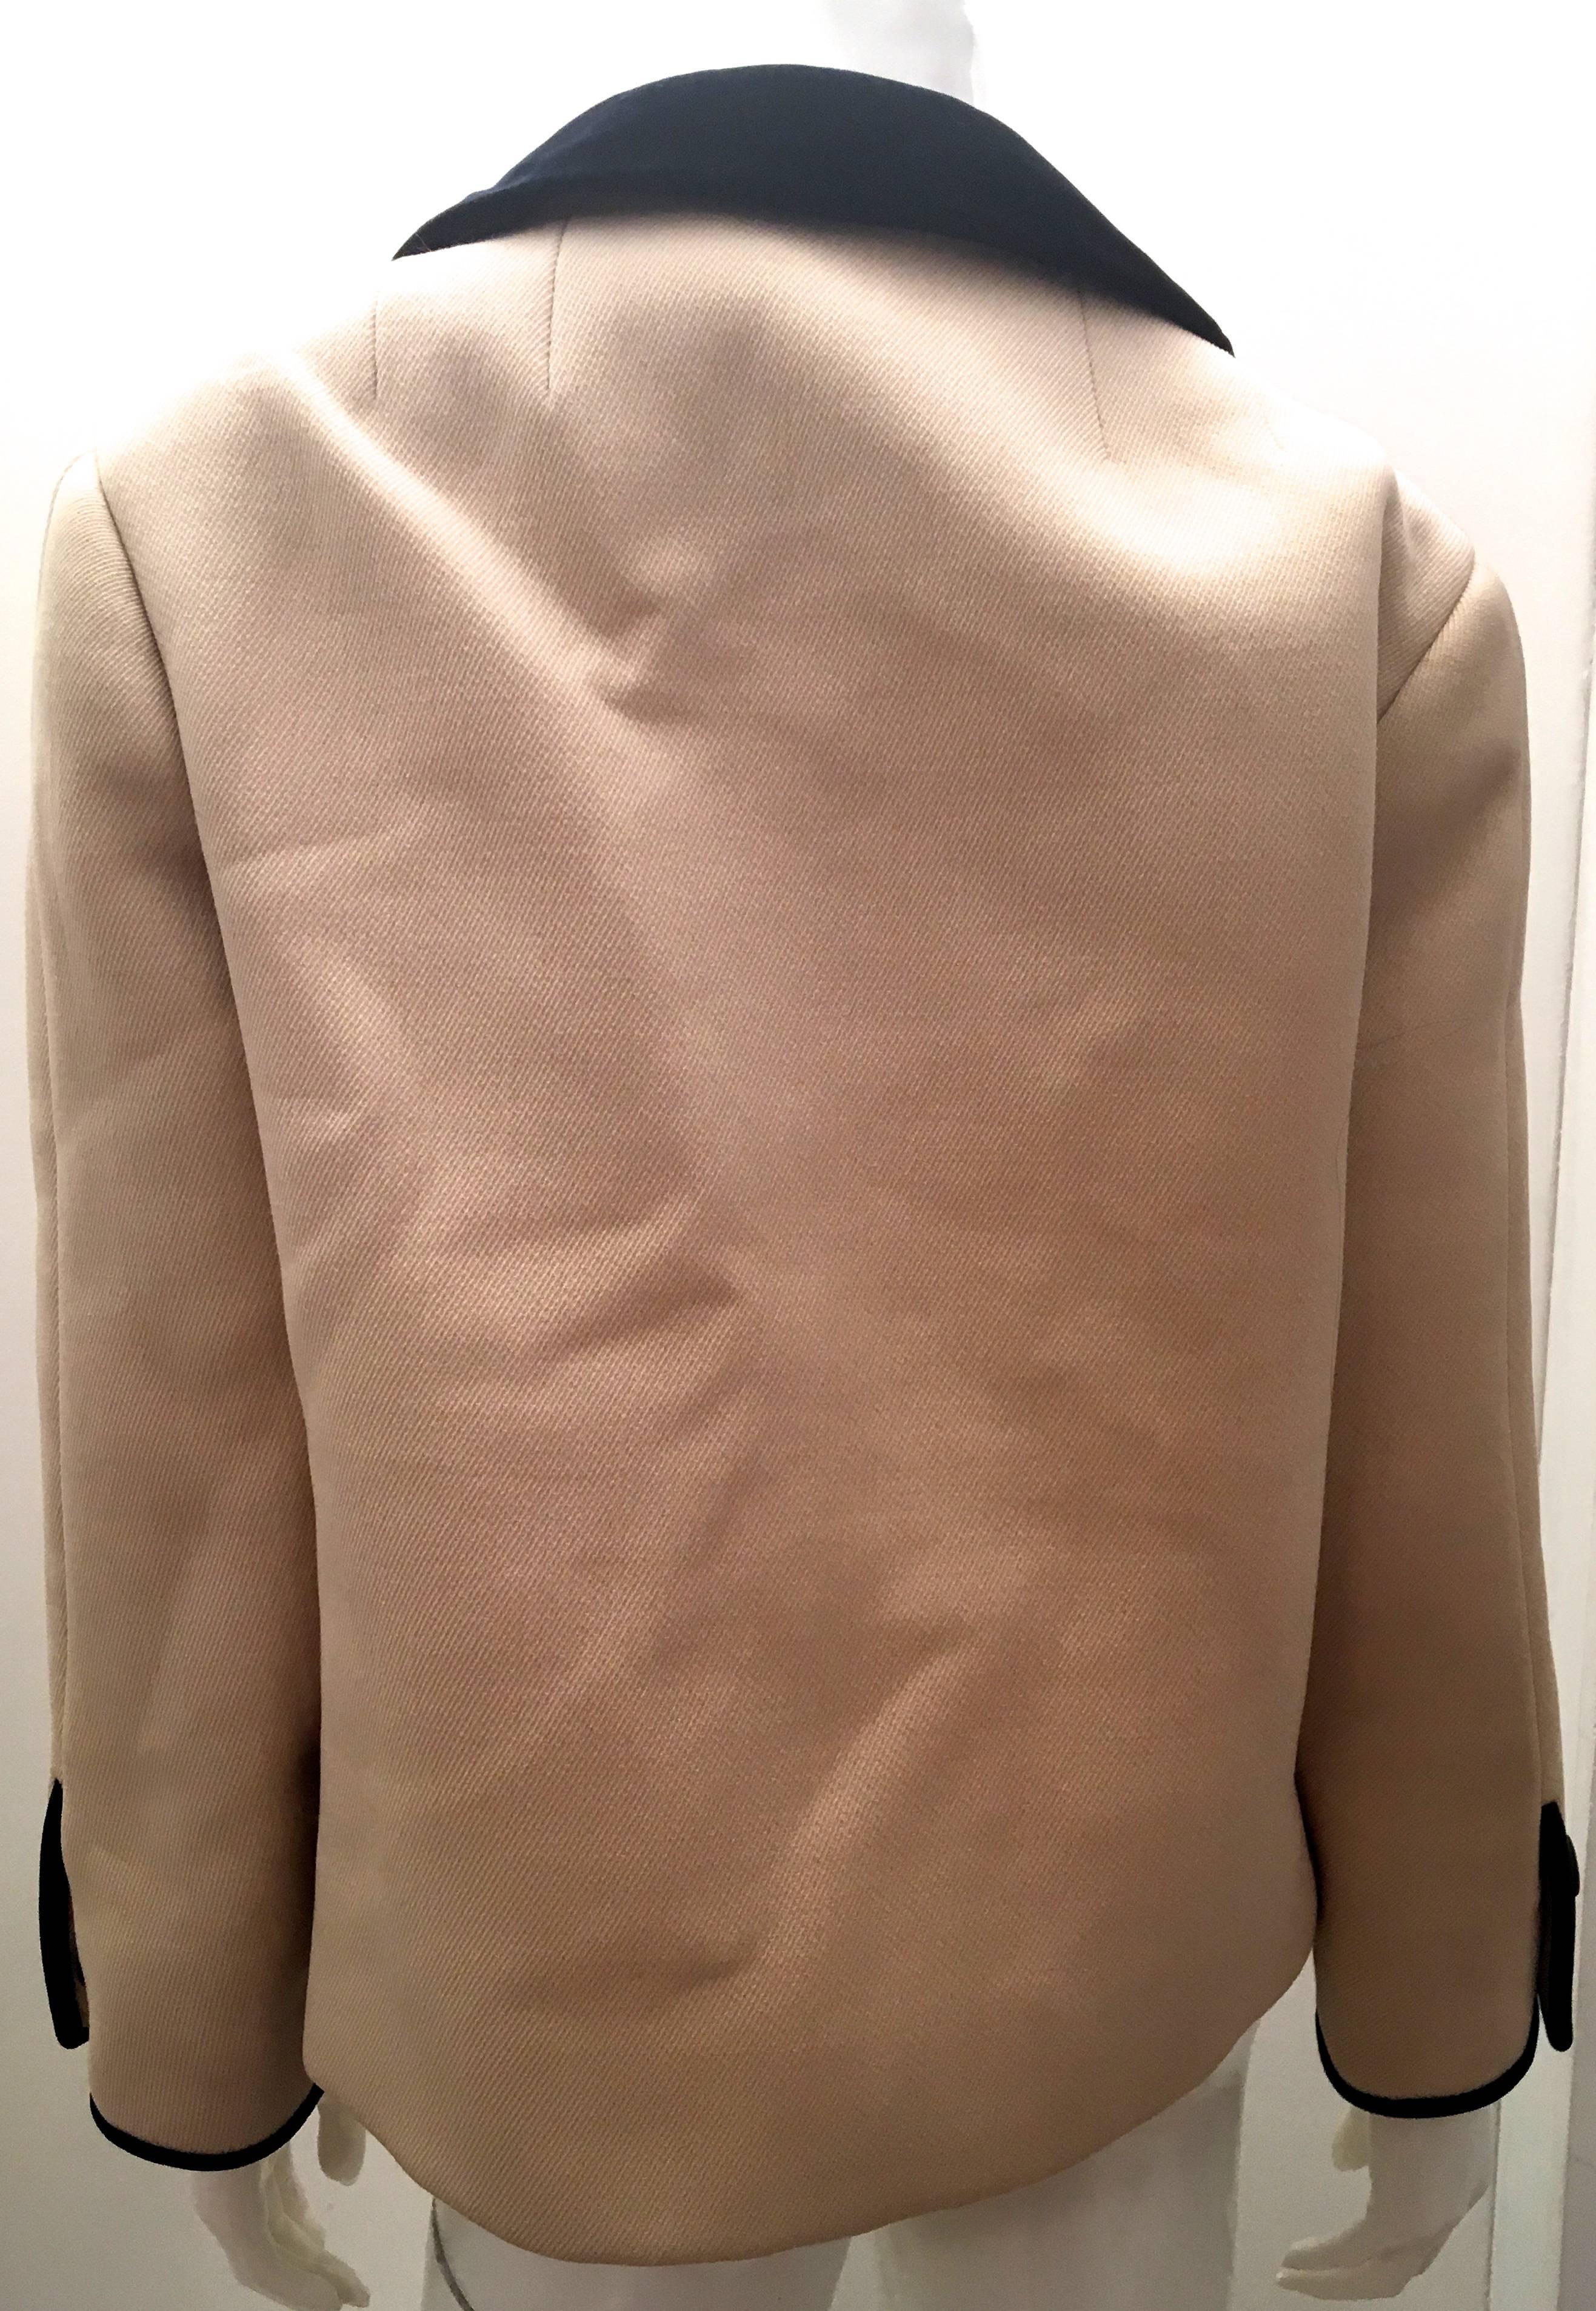 Presented here is a gorgeous 1960's coat from Norman Norell of New York. The coat is a beige cream color with dark navy blue trim throughout the jacket. The coat is double breasted and has large dark navy blue buttons on the front. There are two